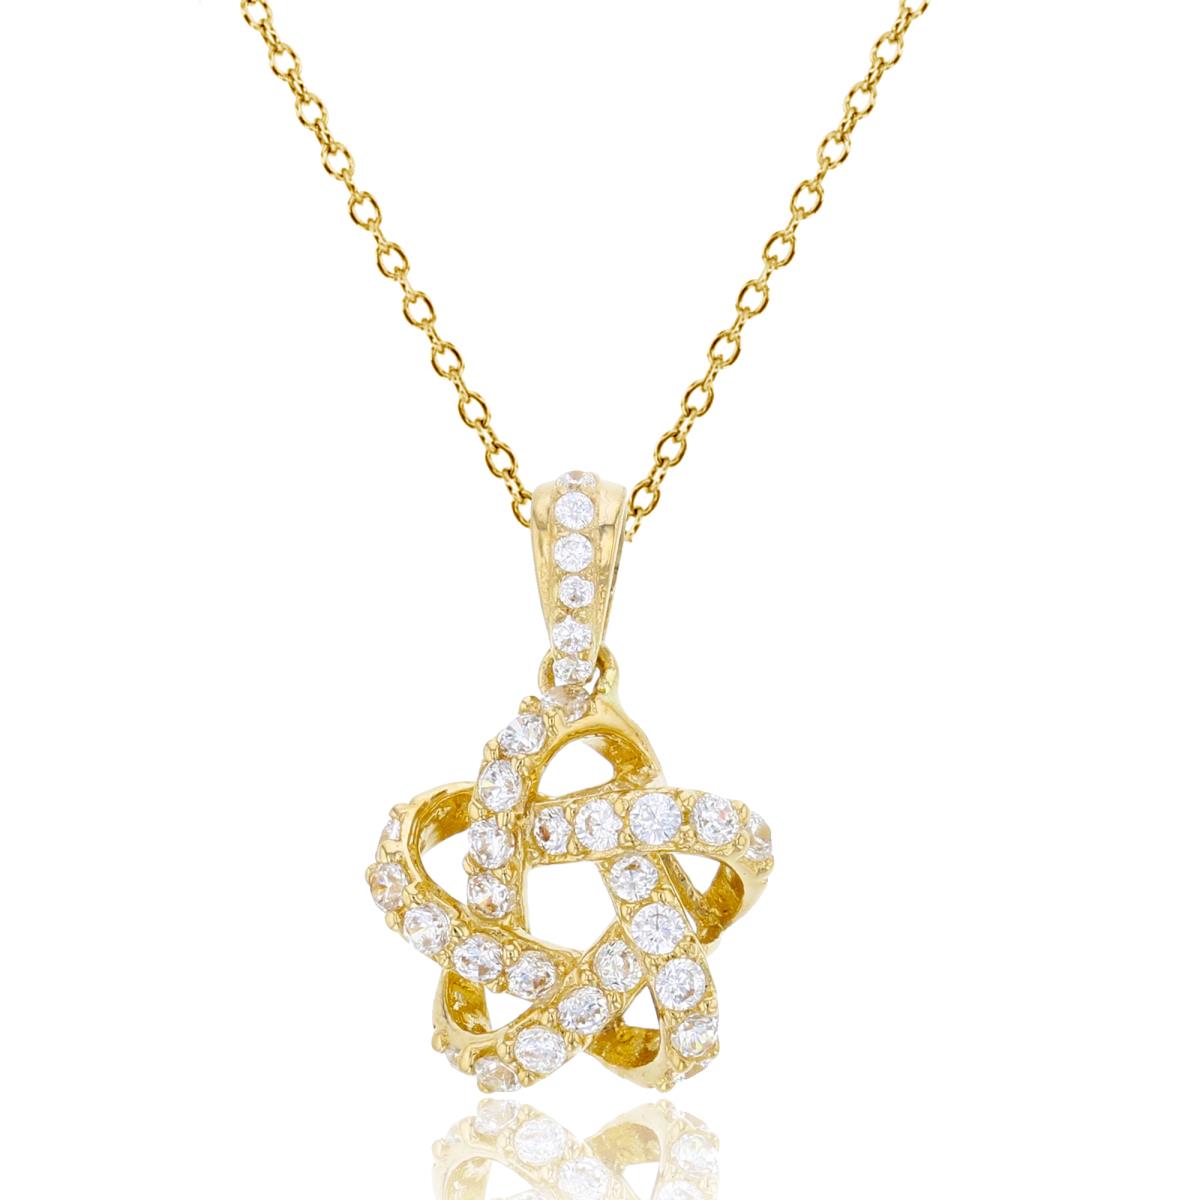 10K Yellow Gold Micropave CZ Star Knot 18" Necklace